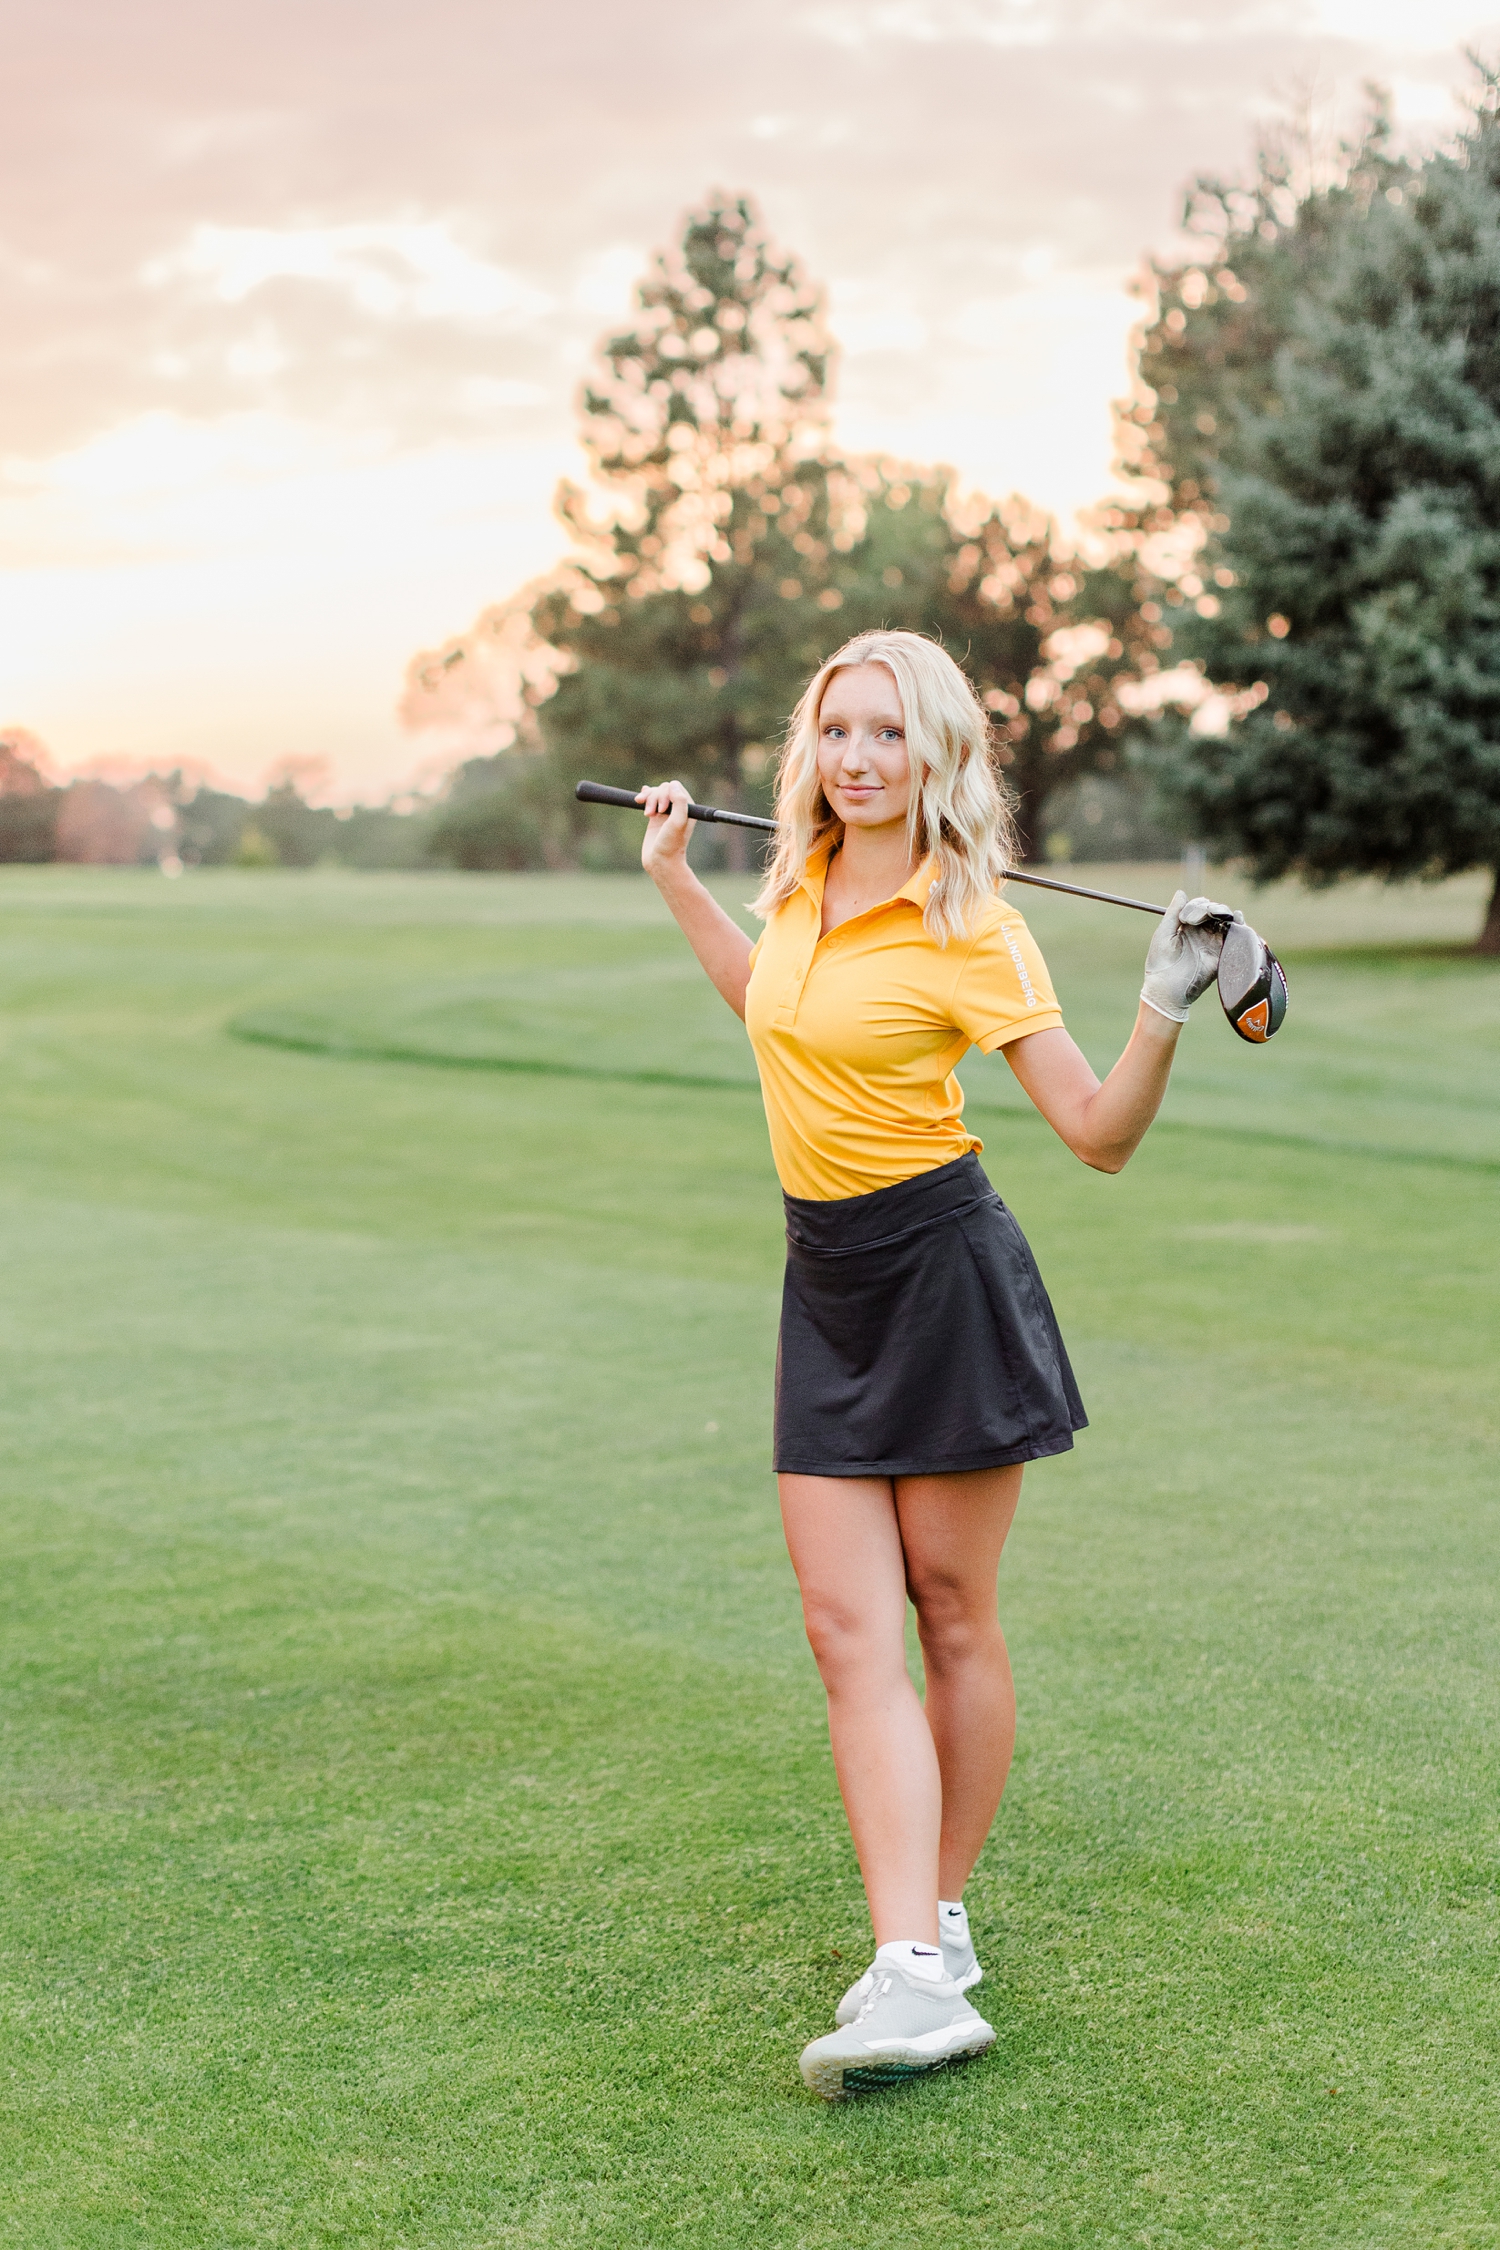 Avery poses with her driver across the back of her shoulders at Spring Valley Golf Course at sunset | CB Studio